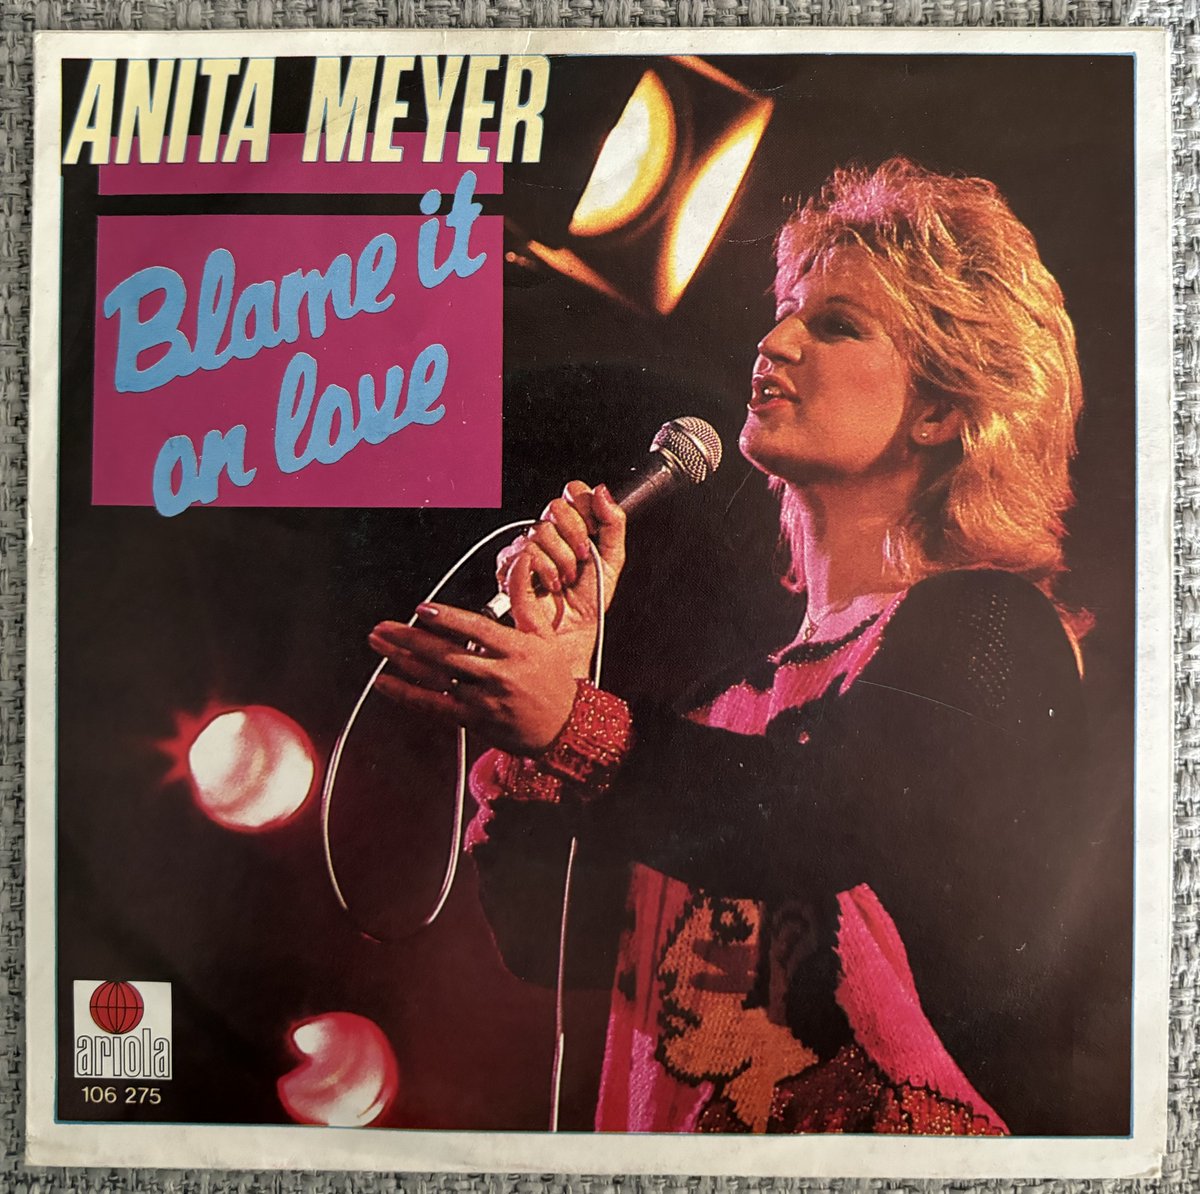 Another single by one of my favourite Dutch singers, Anita Meyer.  Again produced by Martin Duiser, this was the third single from her album Moments Of Pleasure released in 1983. #anitameyer #martinduiser #popjustice #retro #80s #pop #popmusic #singlescollection #treasurechest